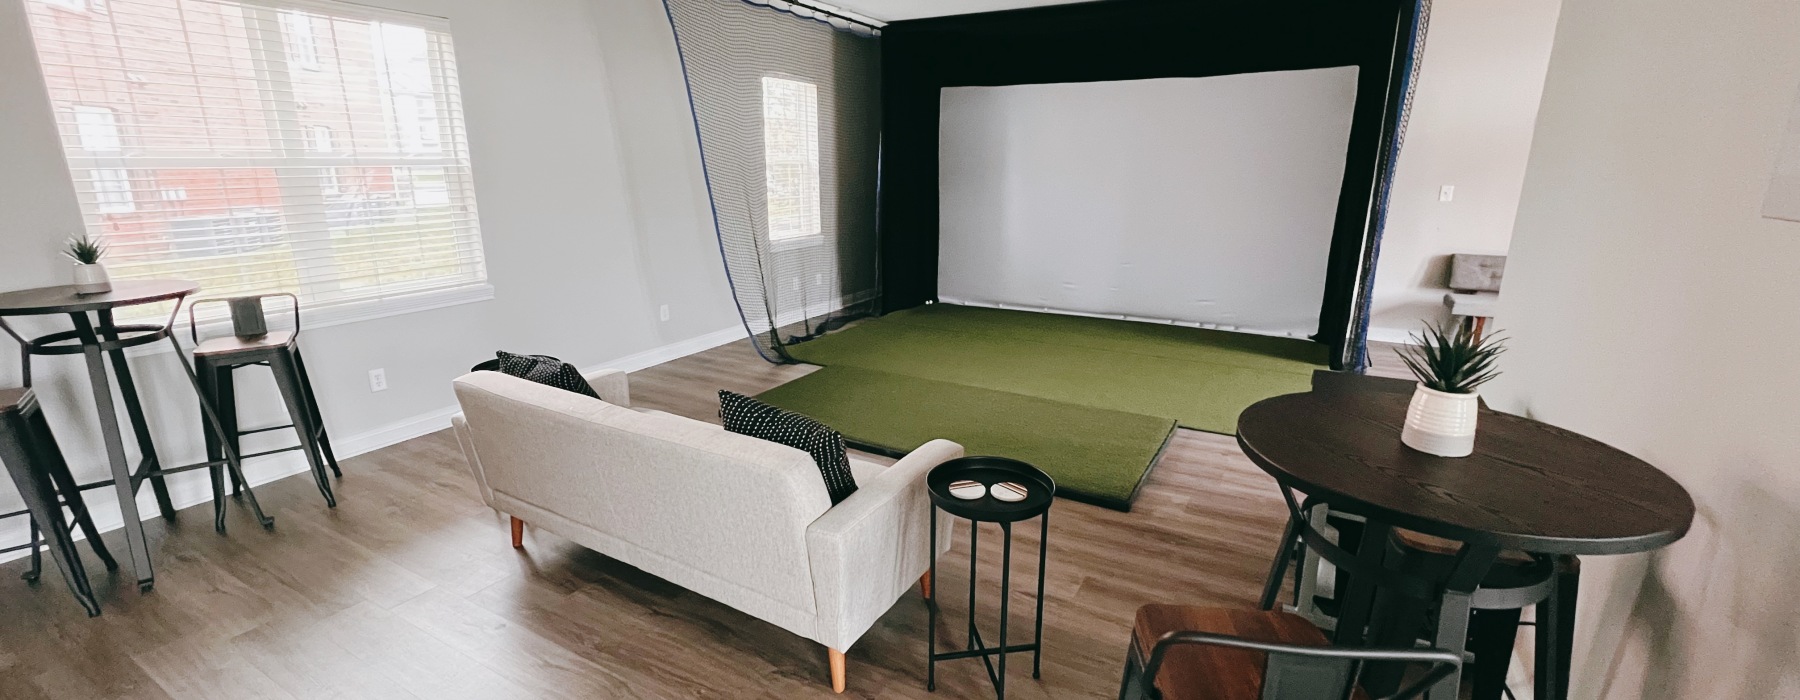 room with a golf simulator and sofa